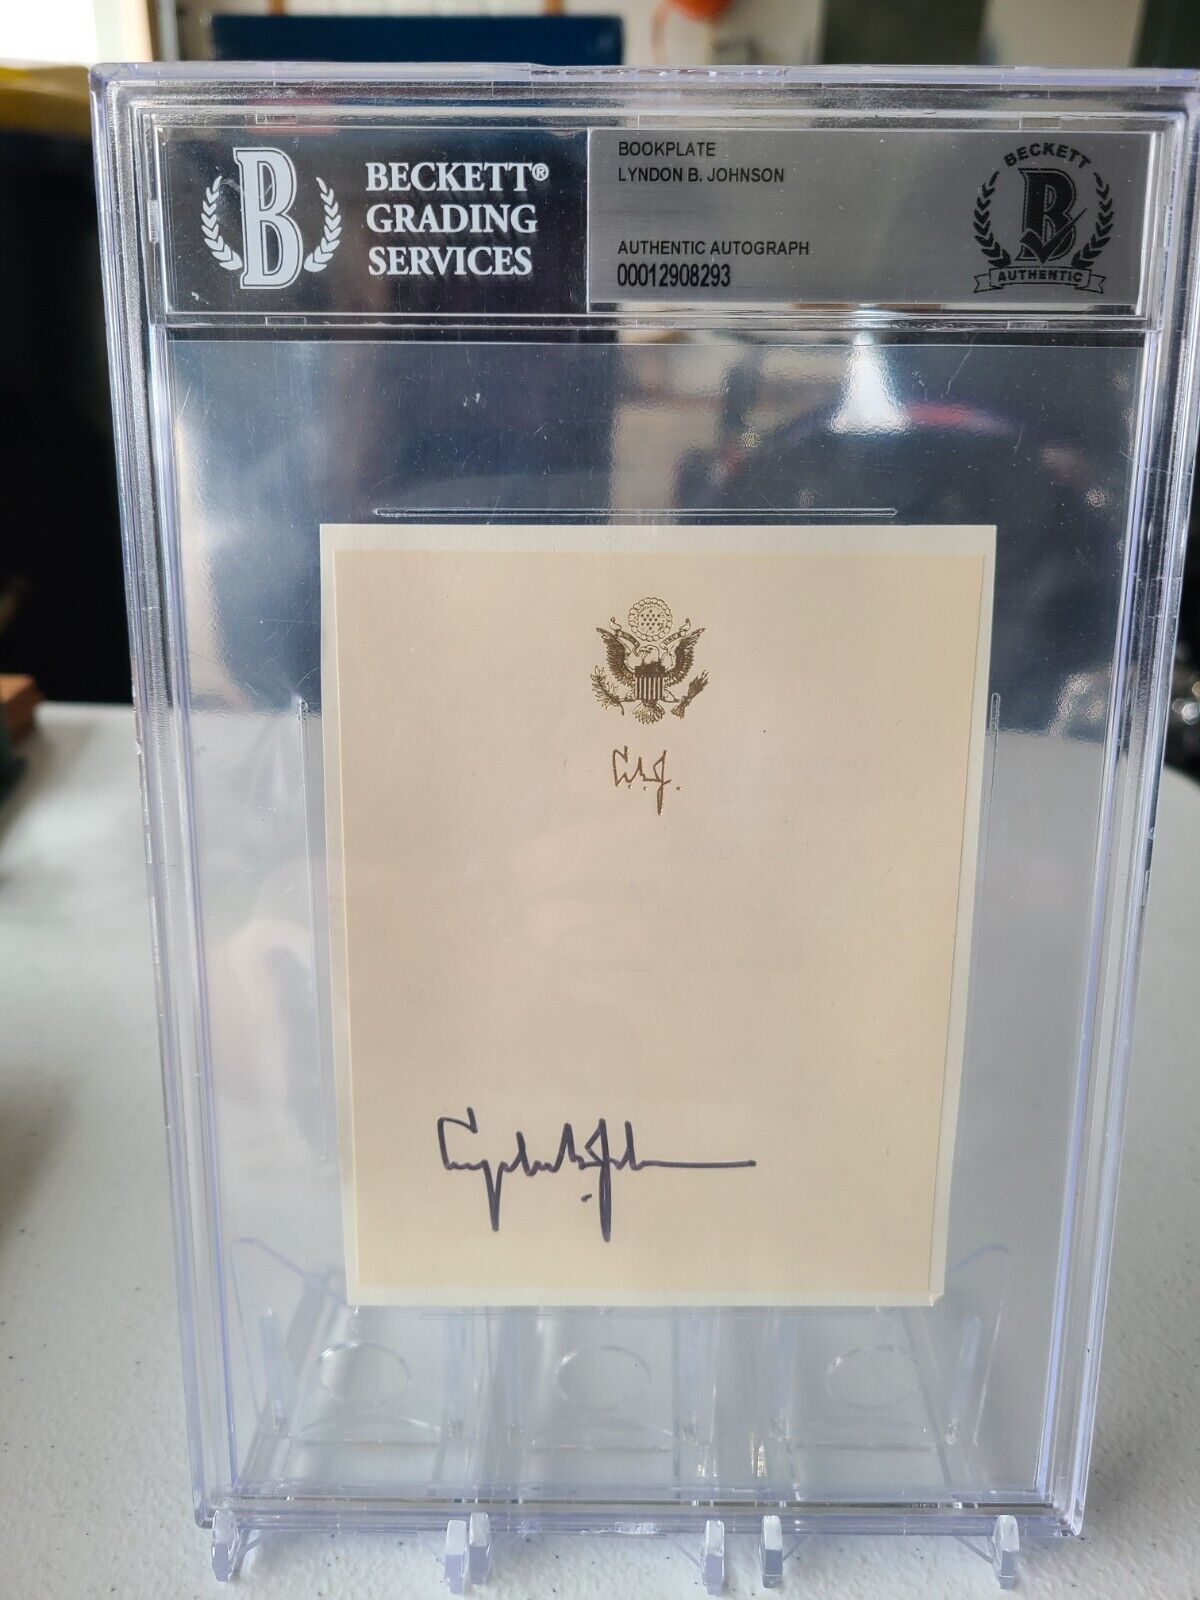 Lyndon B Johnson LBJ Beckett Authentication Services Signed Bookplate Authentic